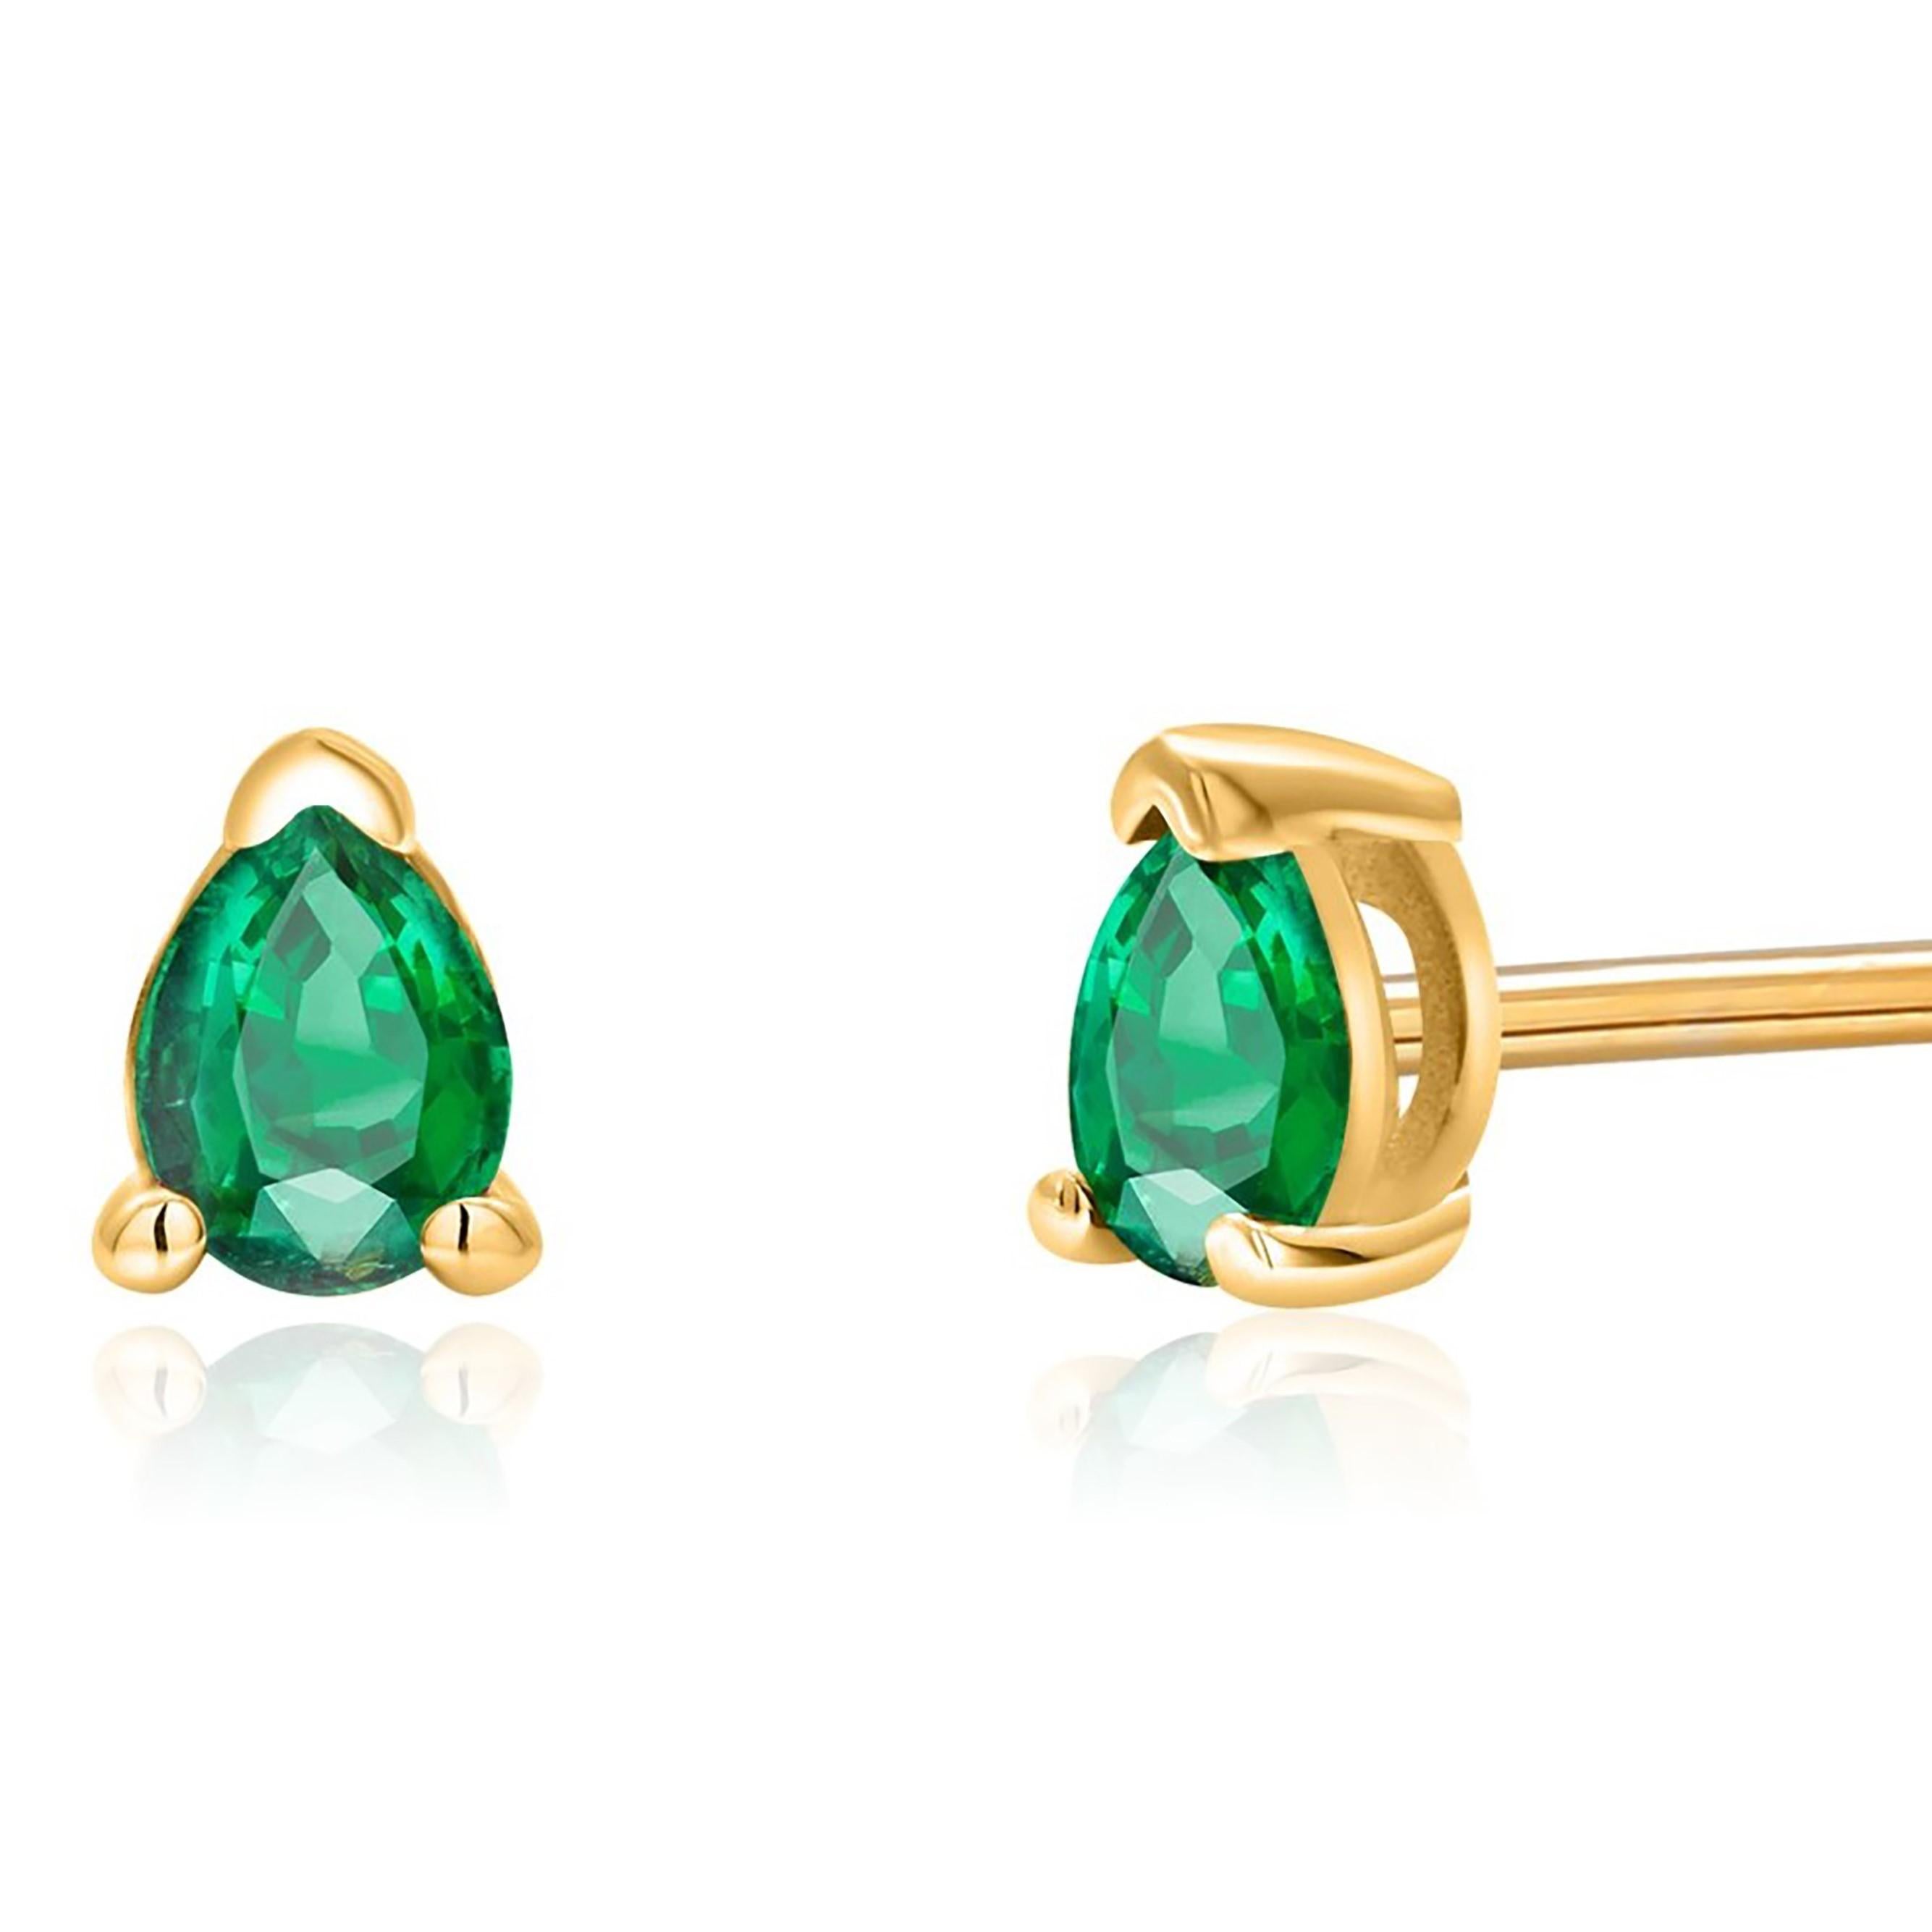 Matched Pair Pear Shaped Emerald 0.45 Carat Yellow Gold 0.20 Inch Stud Earrings In New Condition For Sale In New York, NY